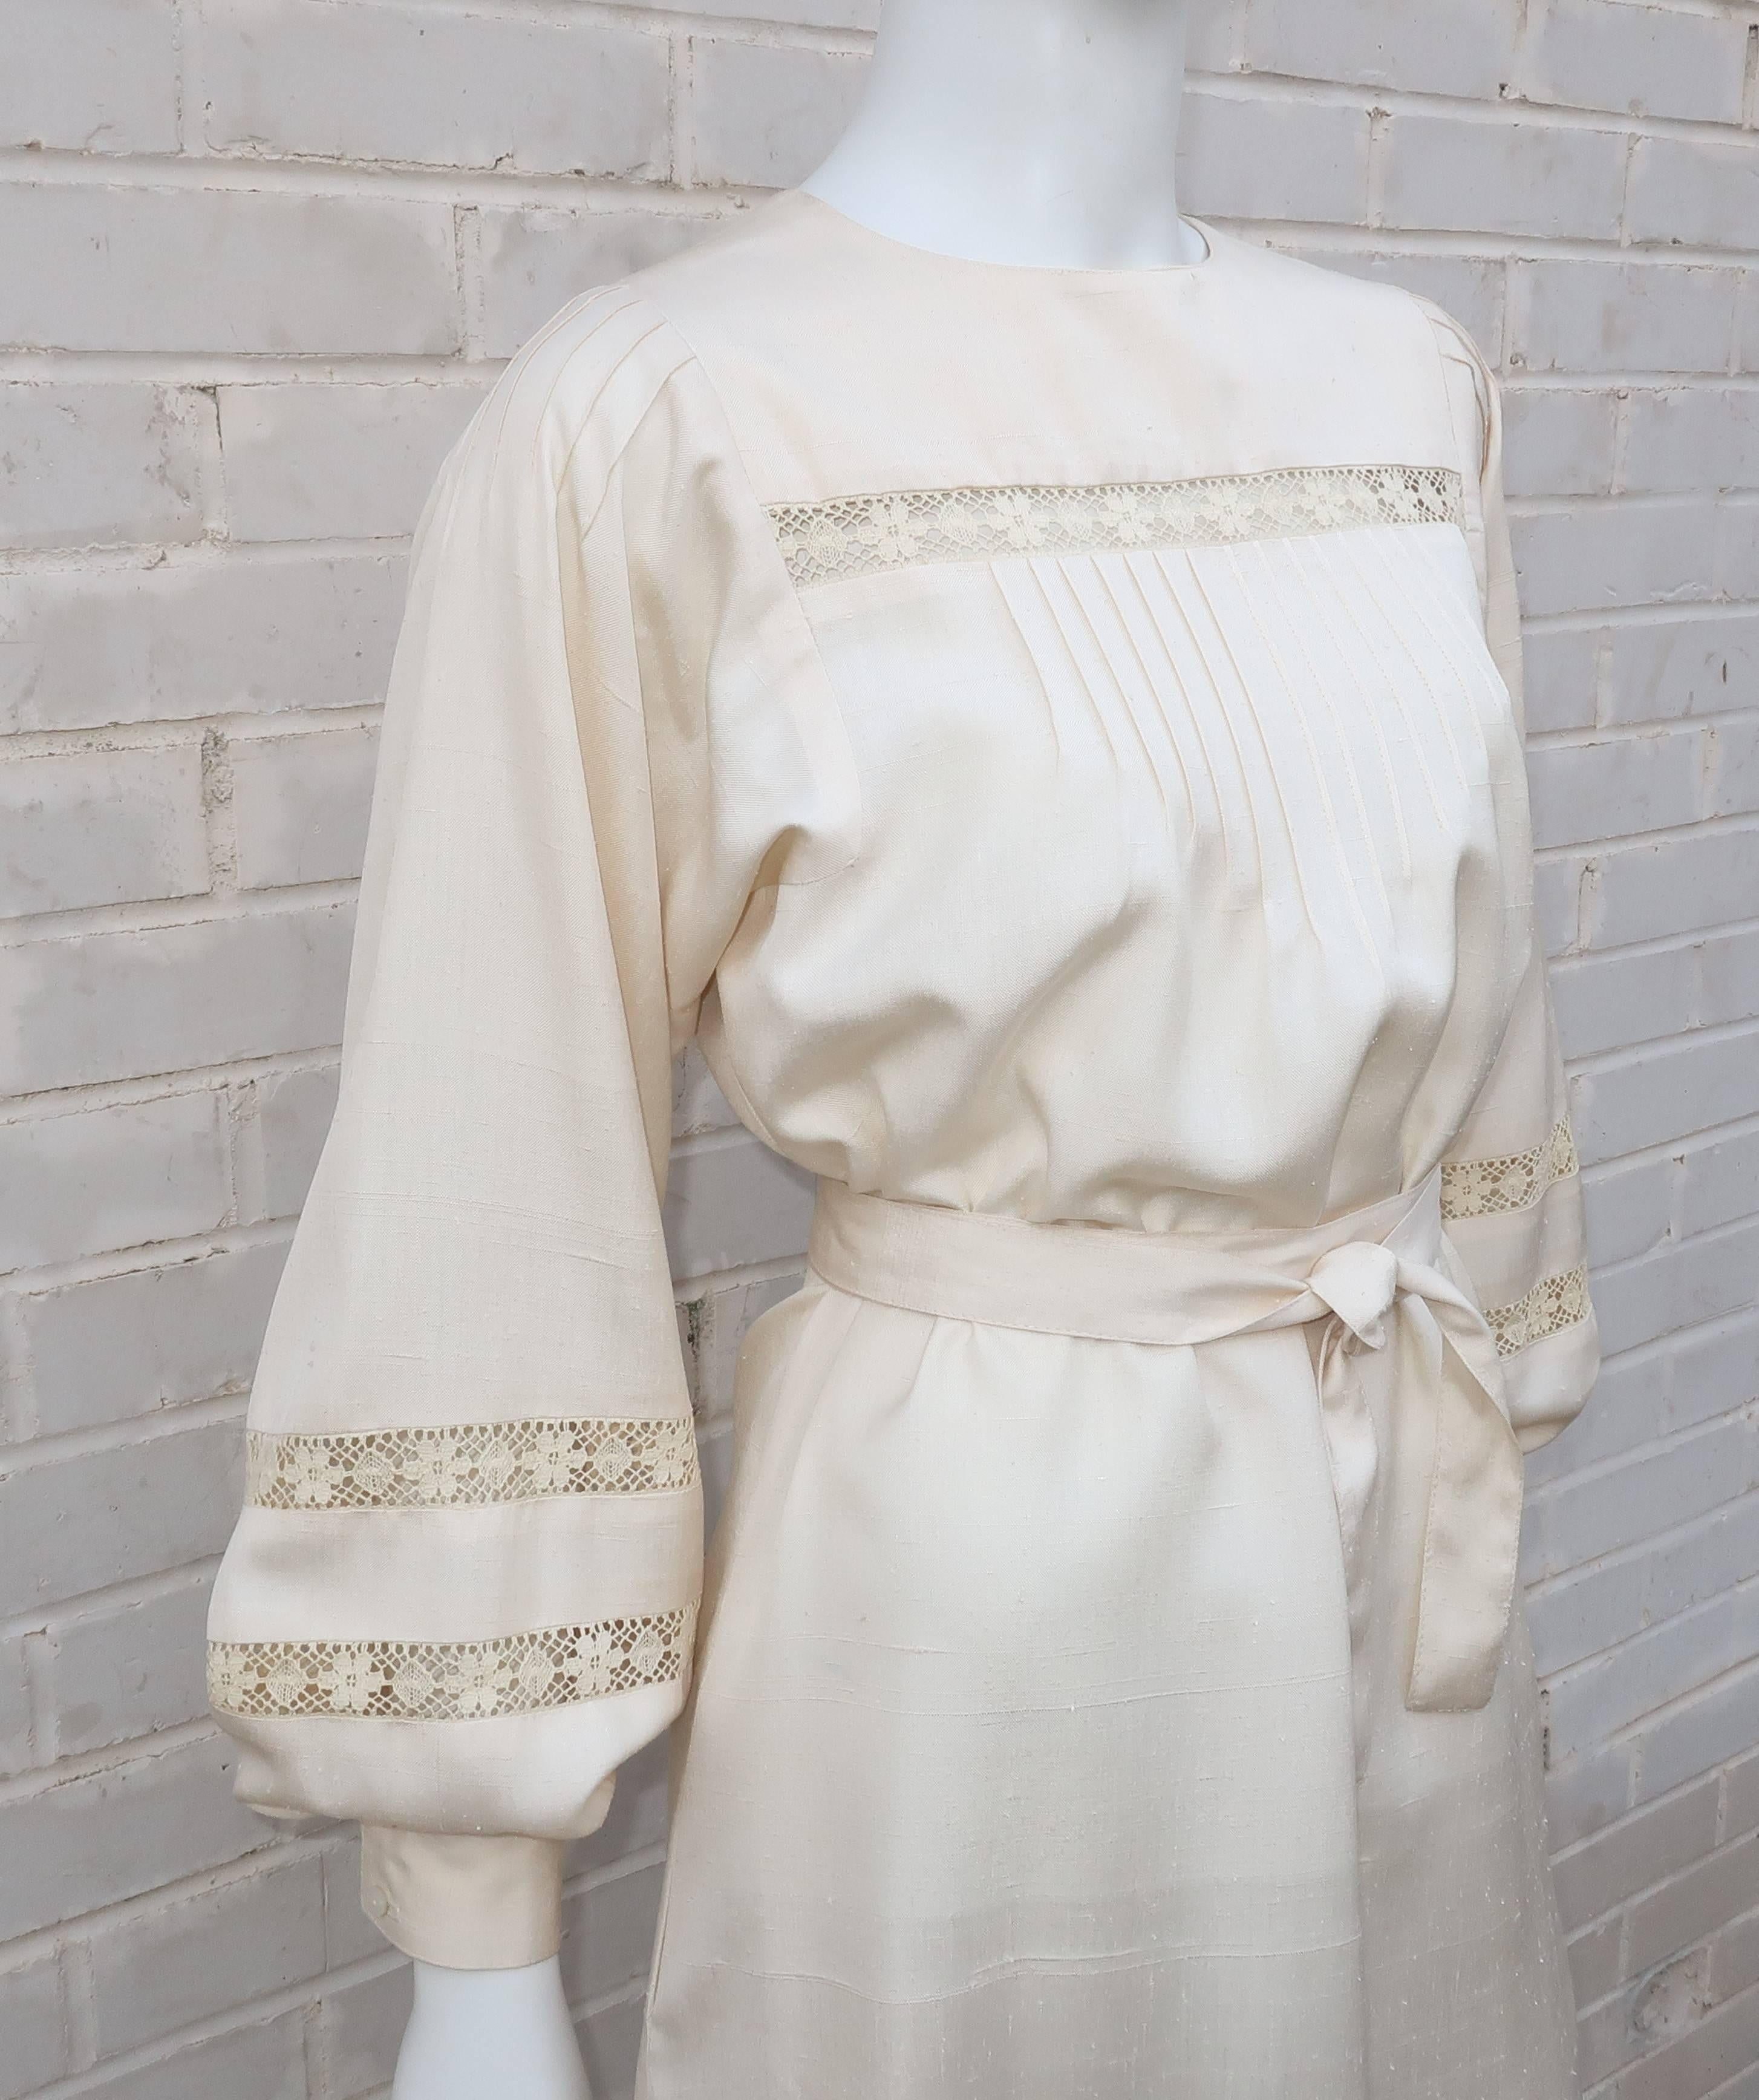 This ladylike ivory dupioni silk dress by Albert & Pearl Nipon is loaded with lovely details typical of the Albert Nipon label.  The smock style collarless dress zips at the back and features side pockets, pintucking and lace inserts at the